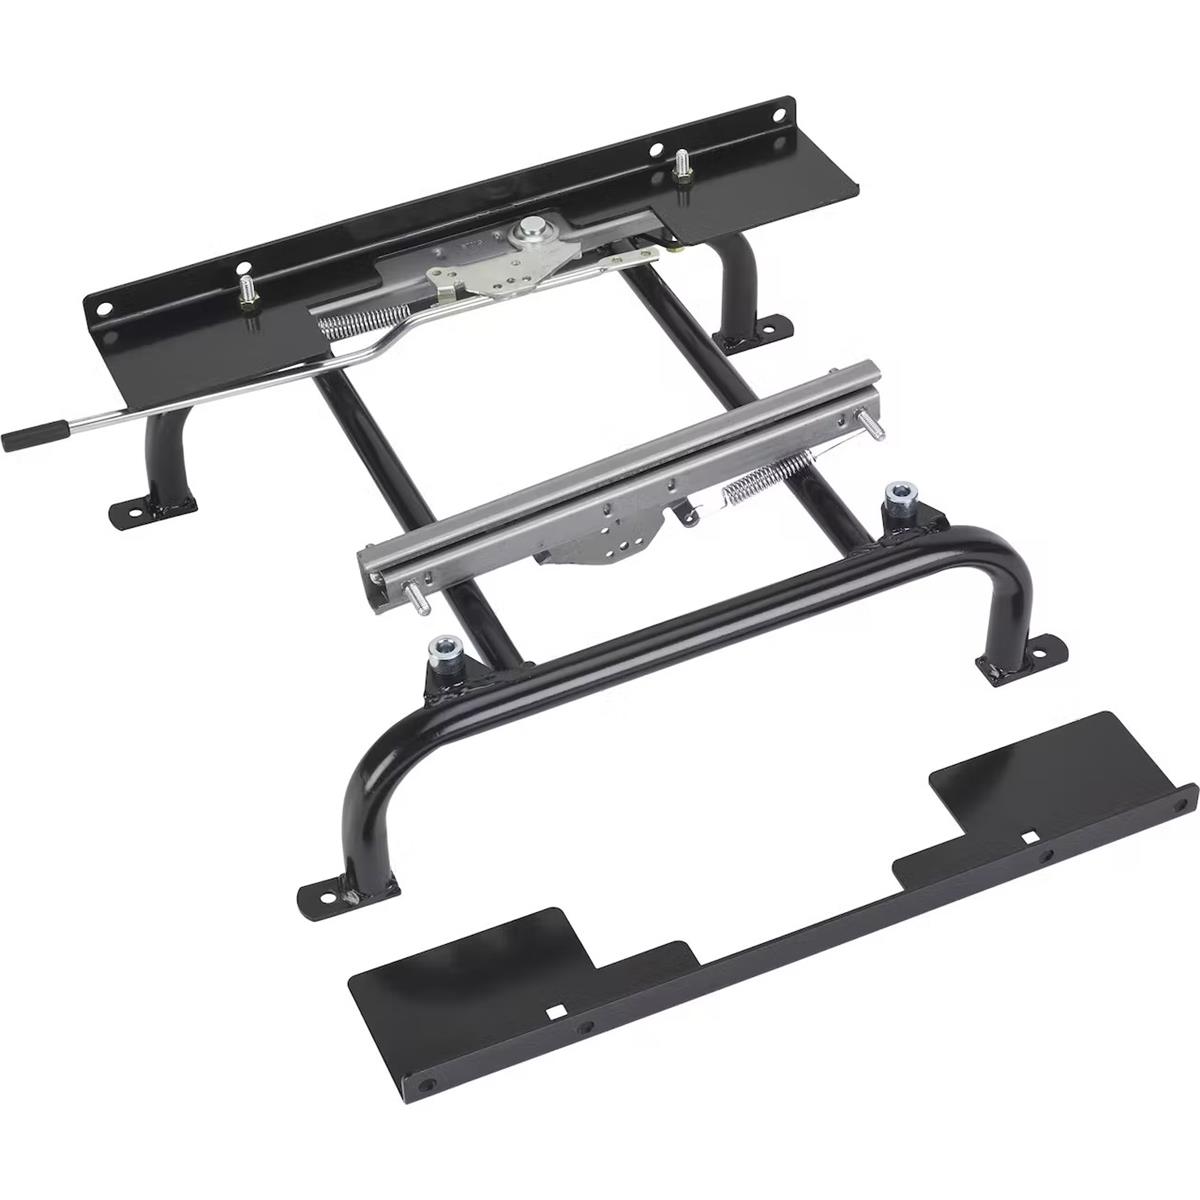 COM-5753 | COM-5753 Universal Seat Mounting Frame with Slider and Mounts Common Application5.jpg